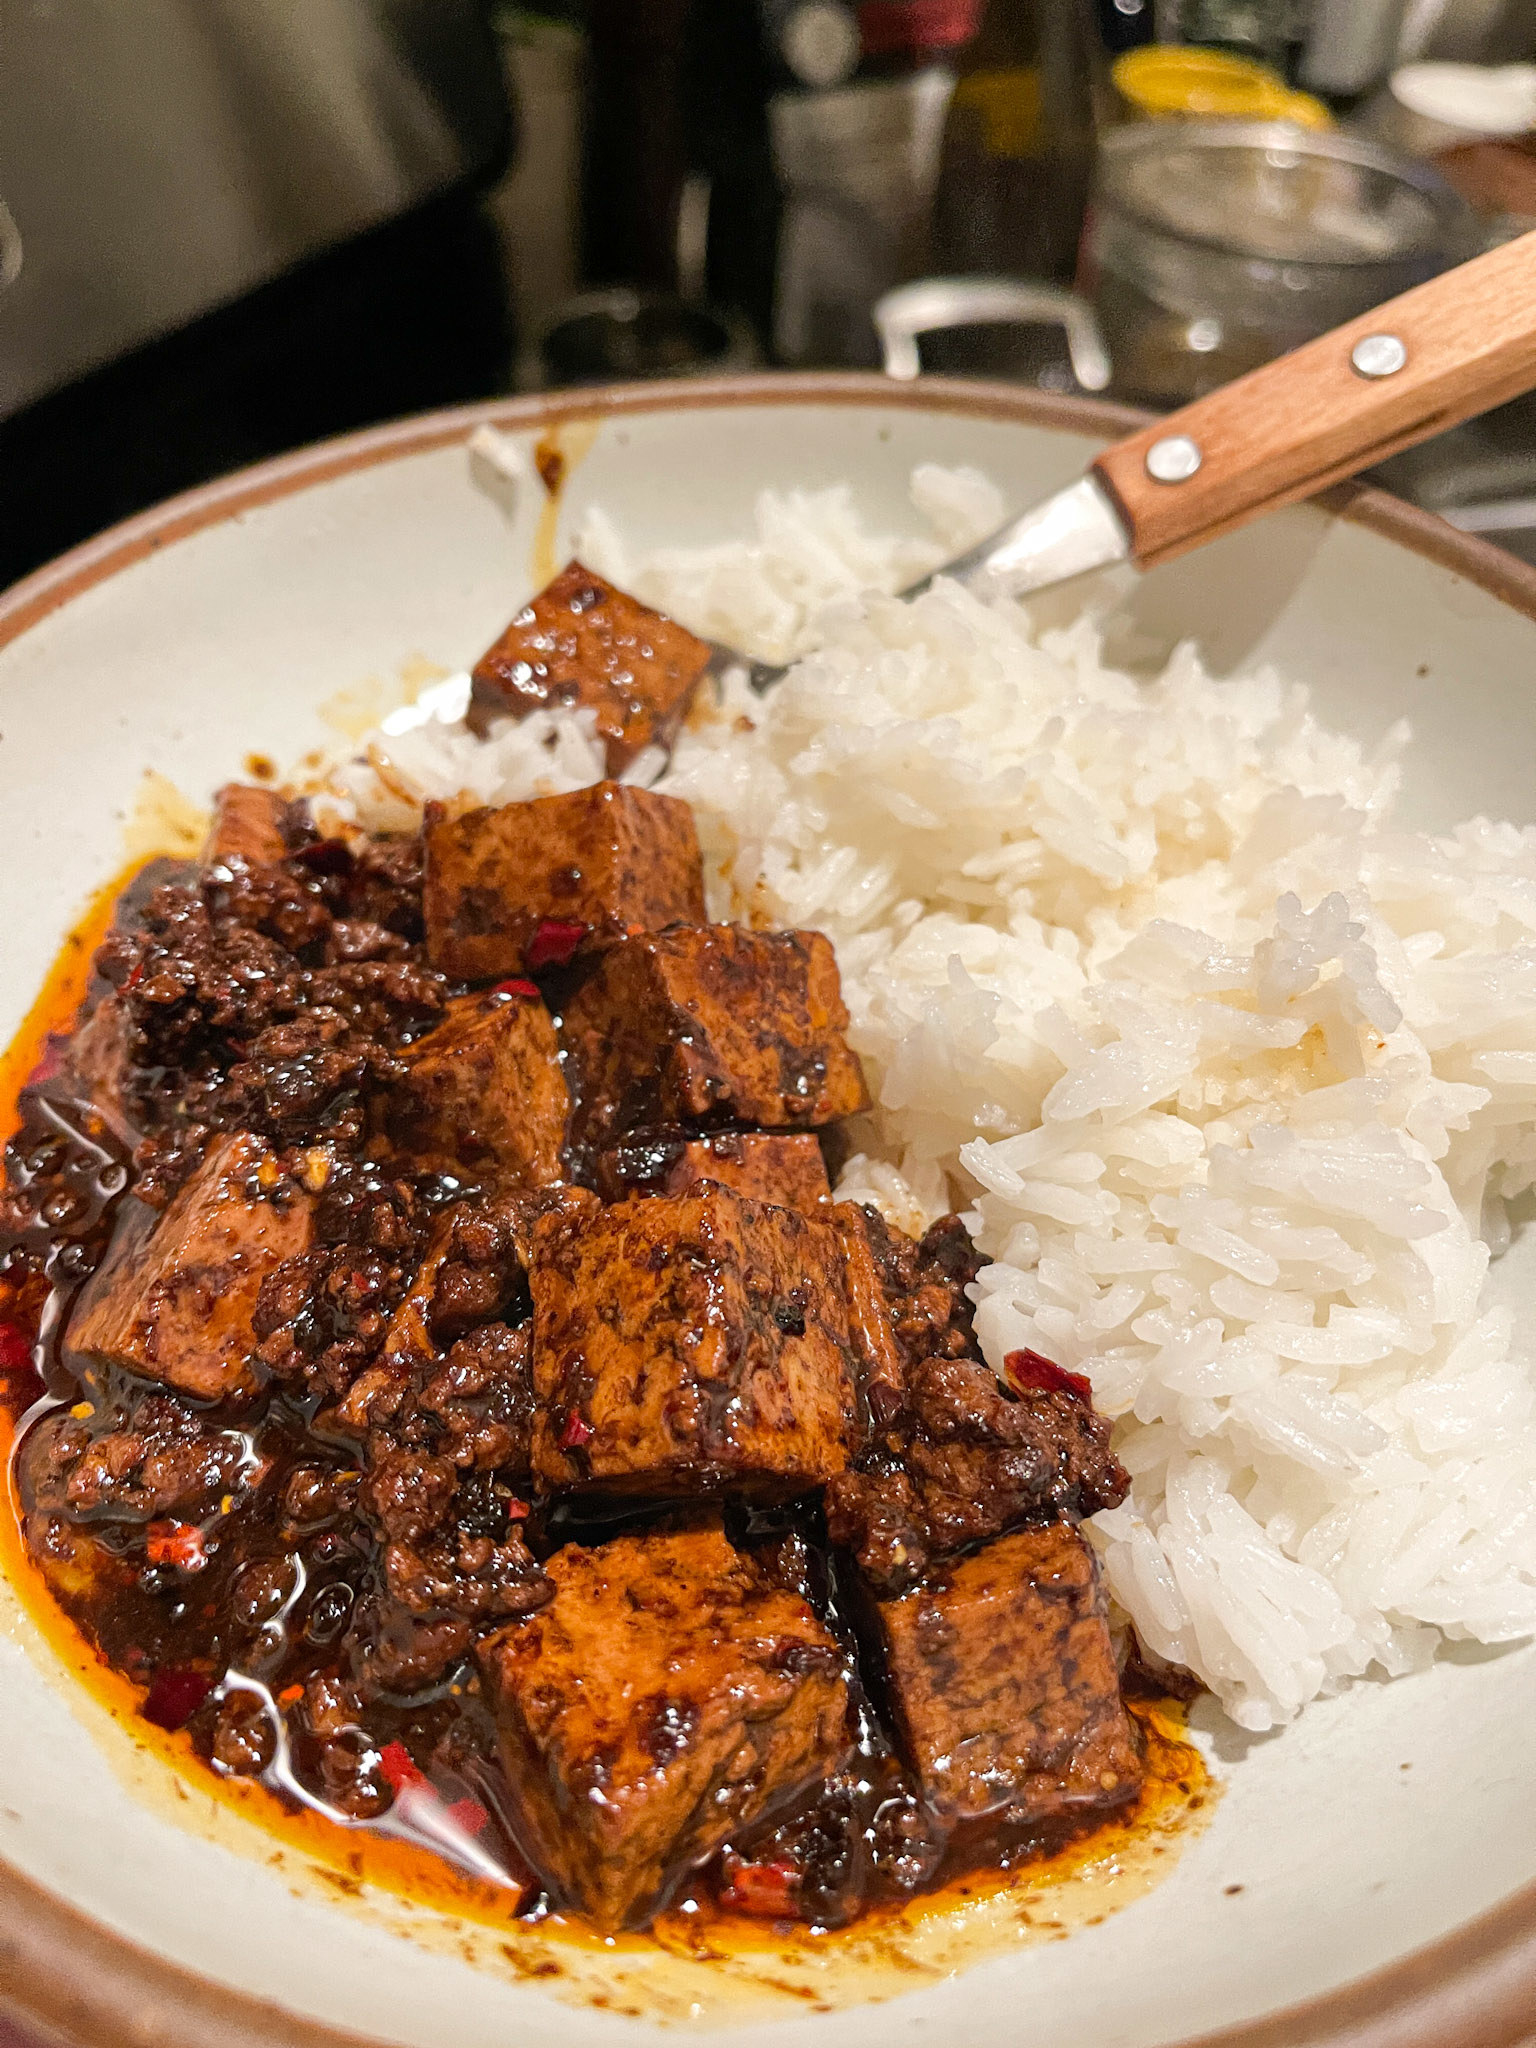 Tofu and beef in a fiery red sauce next to steamed white rice